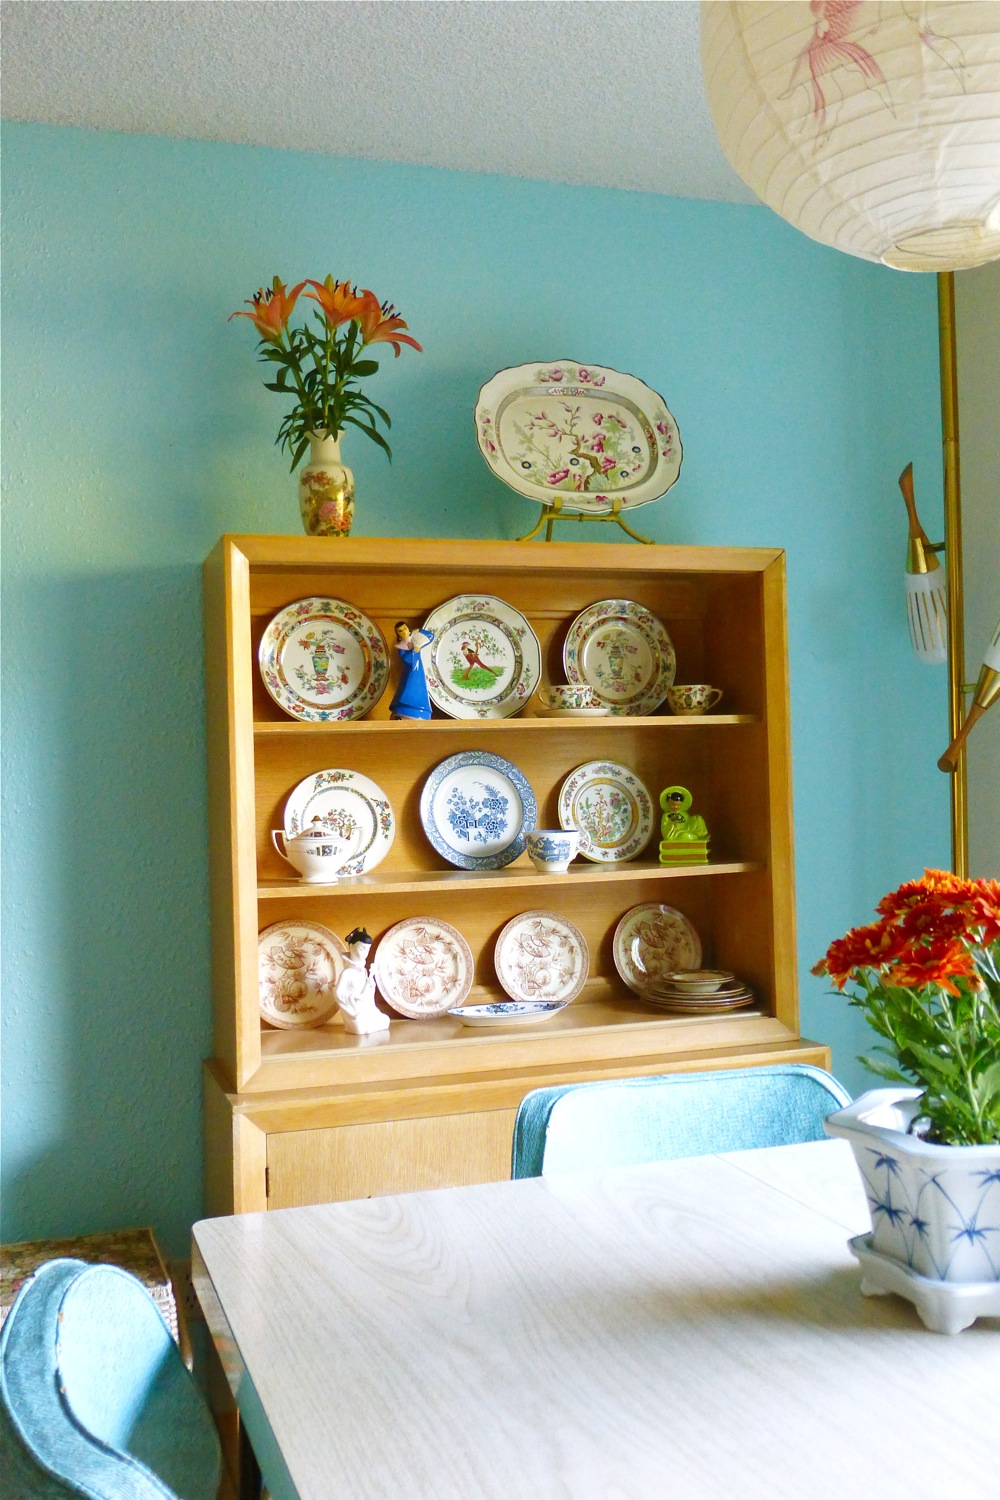 Styling a James Mont Midcentury Chinoiserie Limed Oak Hutch with Antique Chinoiserie Revival Dish ware, Midcentury styling, antique chinoiserie dish ware, chinoiserie styling, 1880 Brownfield & Son, 1900 Royal Doulton Pekin, 1917 Wood & Sons Woods Ware Wincanton plate, 1917 Wood & Sons Woods Ware Canton teacup, 1917 Wood & Sons Woods Ware Mayfair platter, Klein ©49 asian Chinoiserie figurine, 1913 Johnson Bros Pareekware plate, 1920 Cleveland China sugar bowl, 1905 Foley Art China Peacock Pottery Indian Tree plate, midcentury asian girl with fan bookend figurine, 1880 Alaska H & R plates, 1950 Ardalt Lenwile China asian girl playing musical instrument figurine, 1862 Burgess & Leigh Indian Tree platter